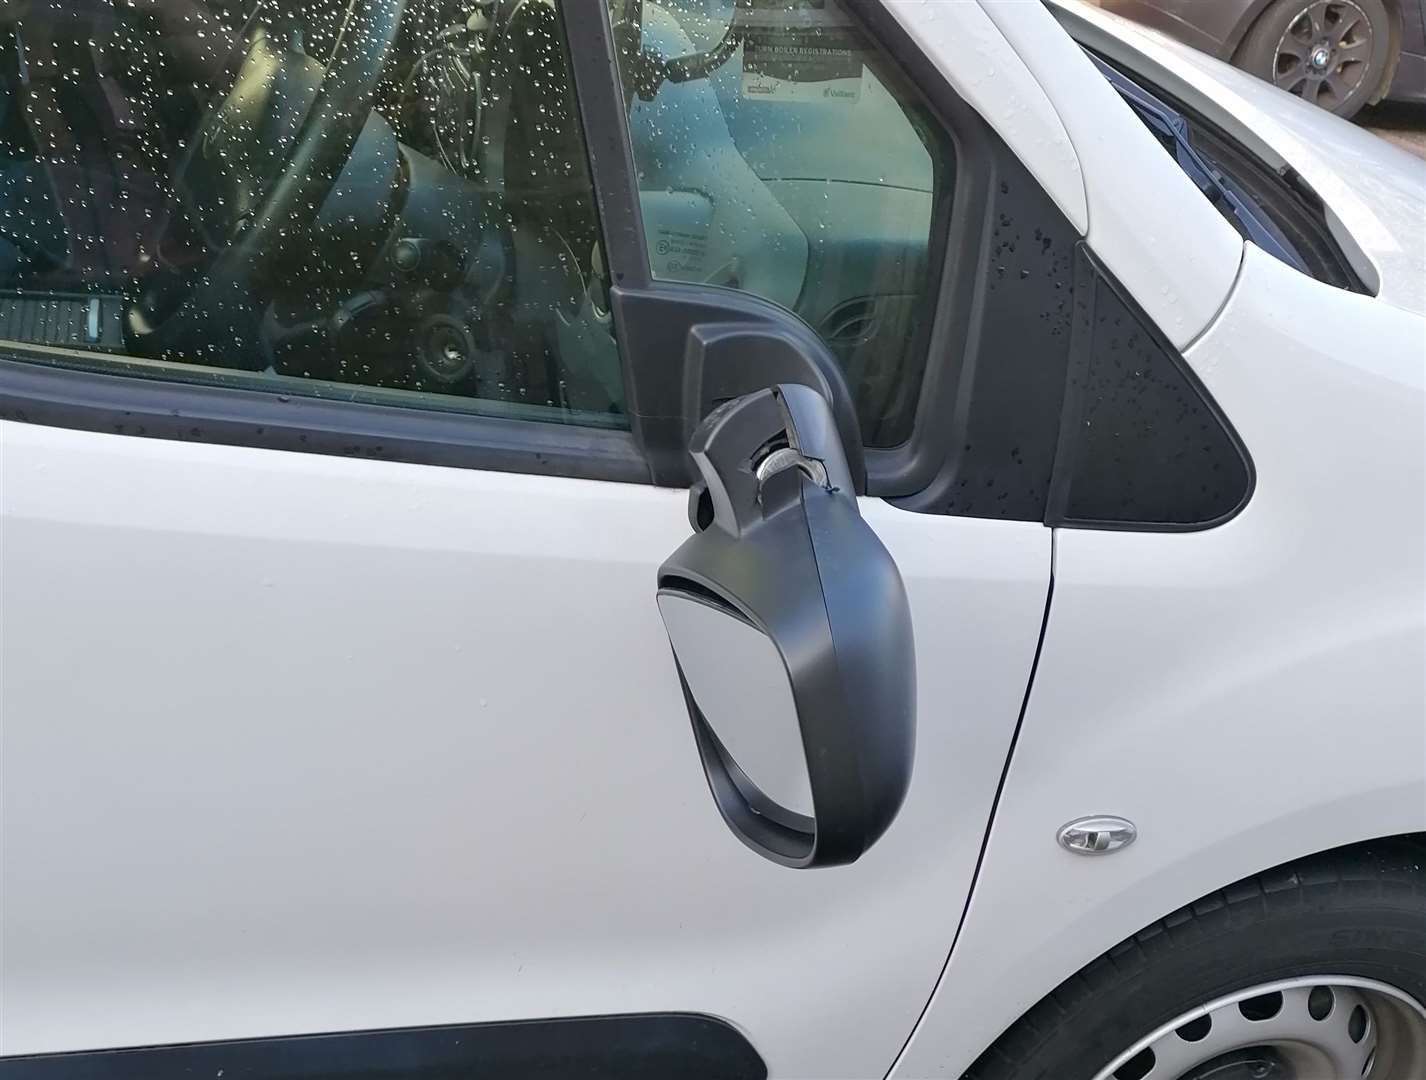 Wing mirrors on cars were broken